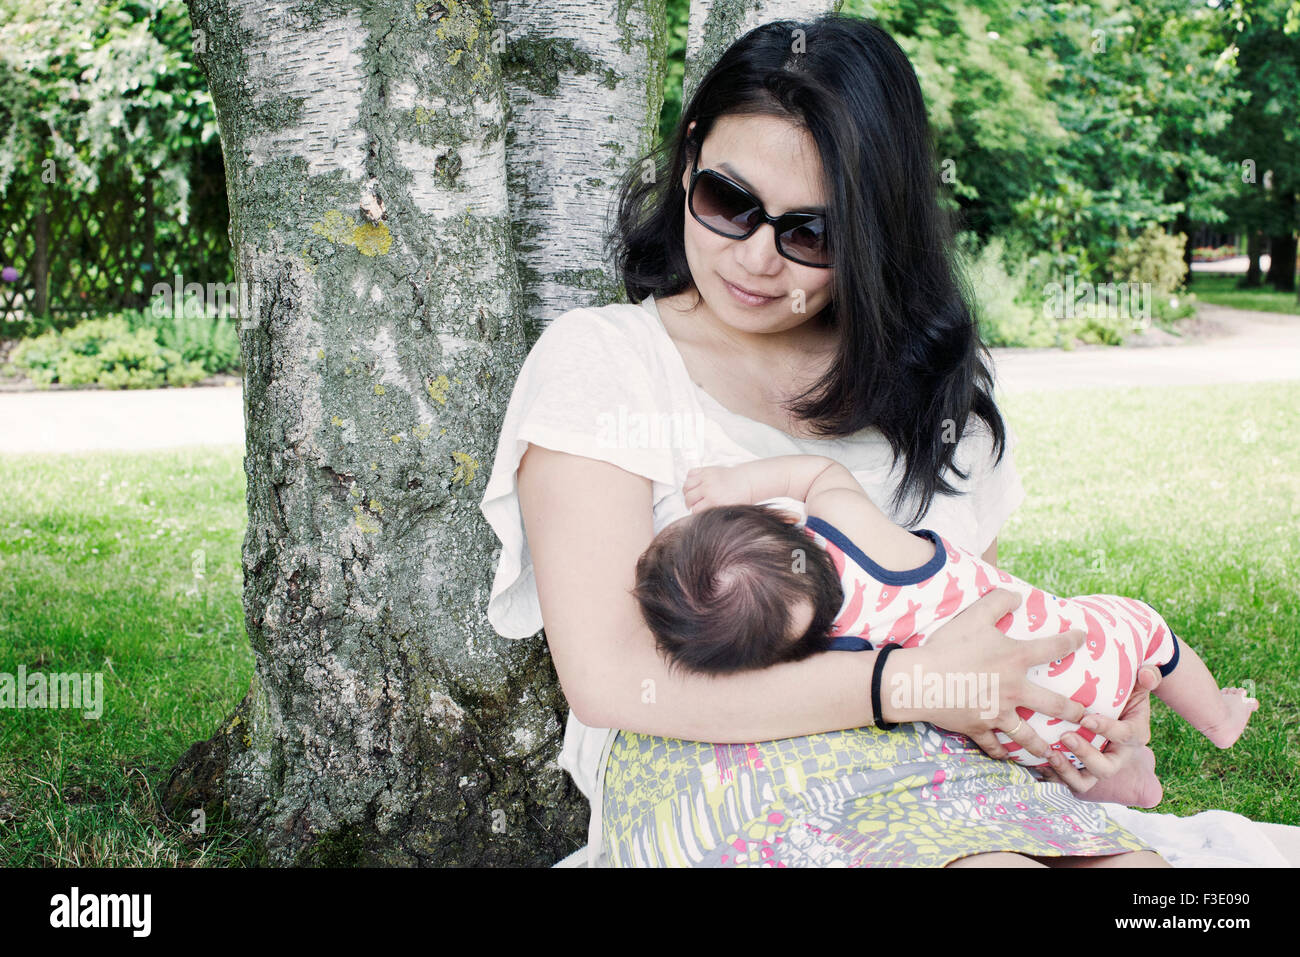 Woman breast feeding infant in park Stock Photo